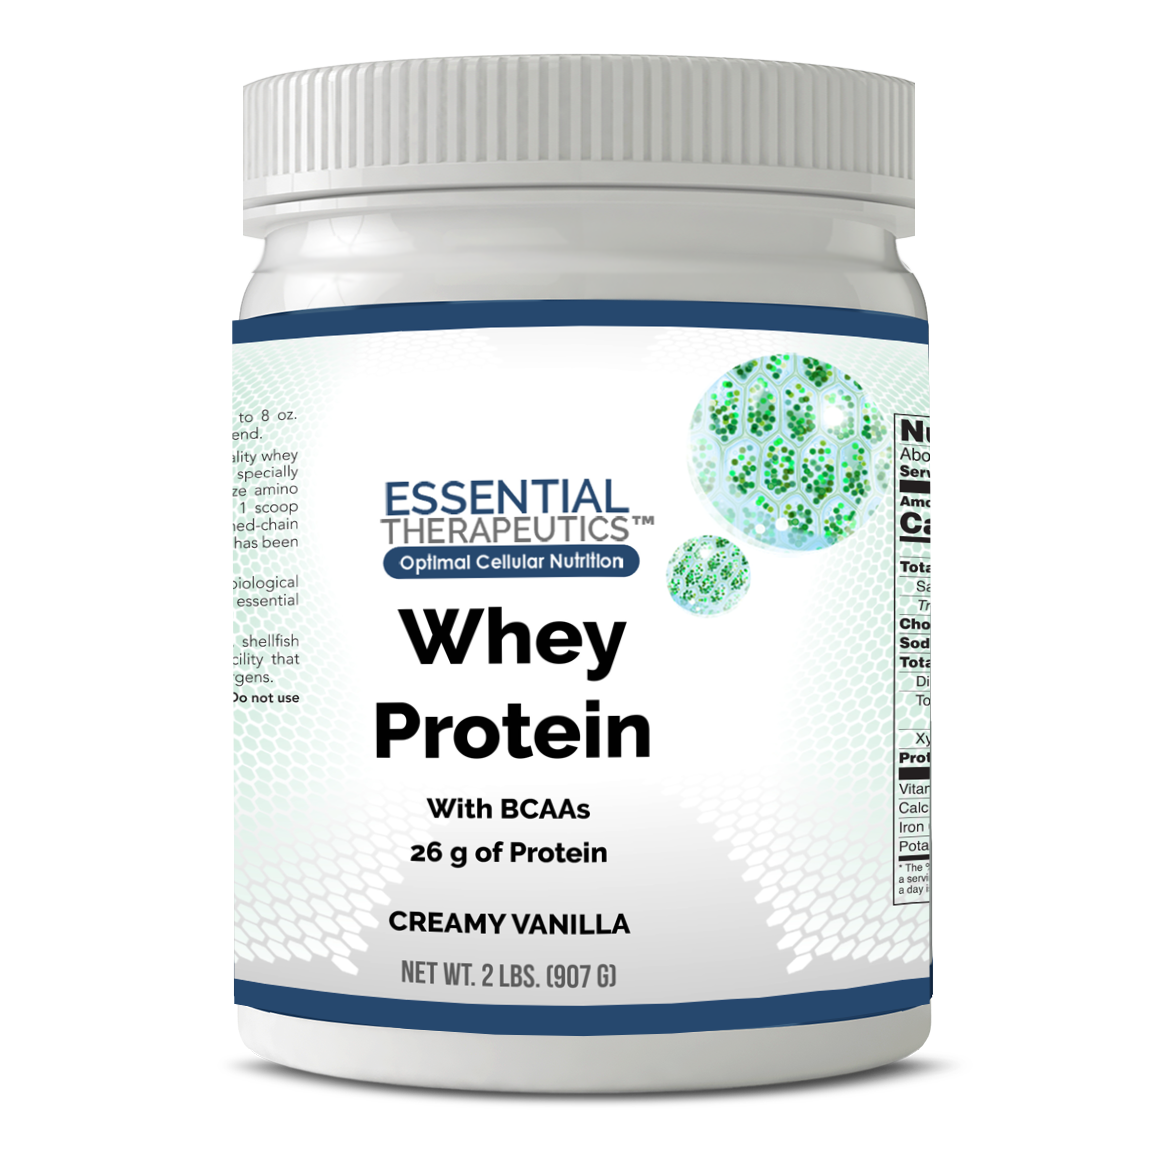 Whey Protein – The Essential